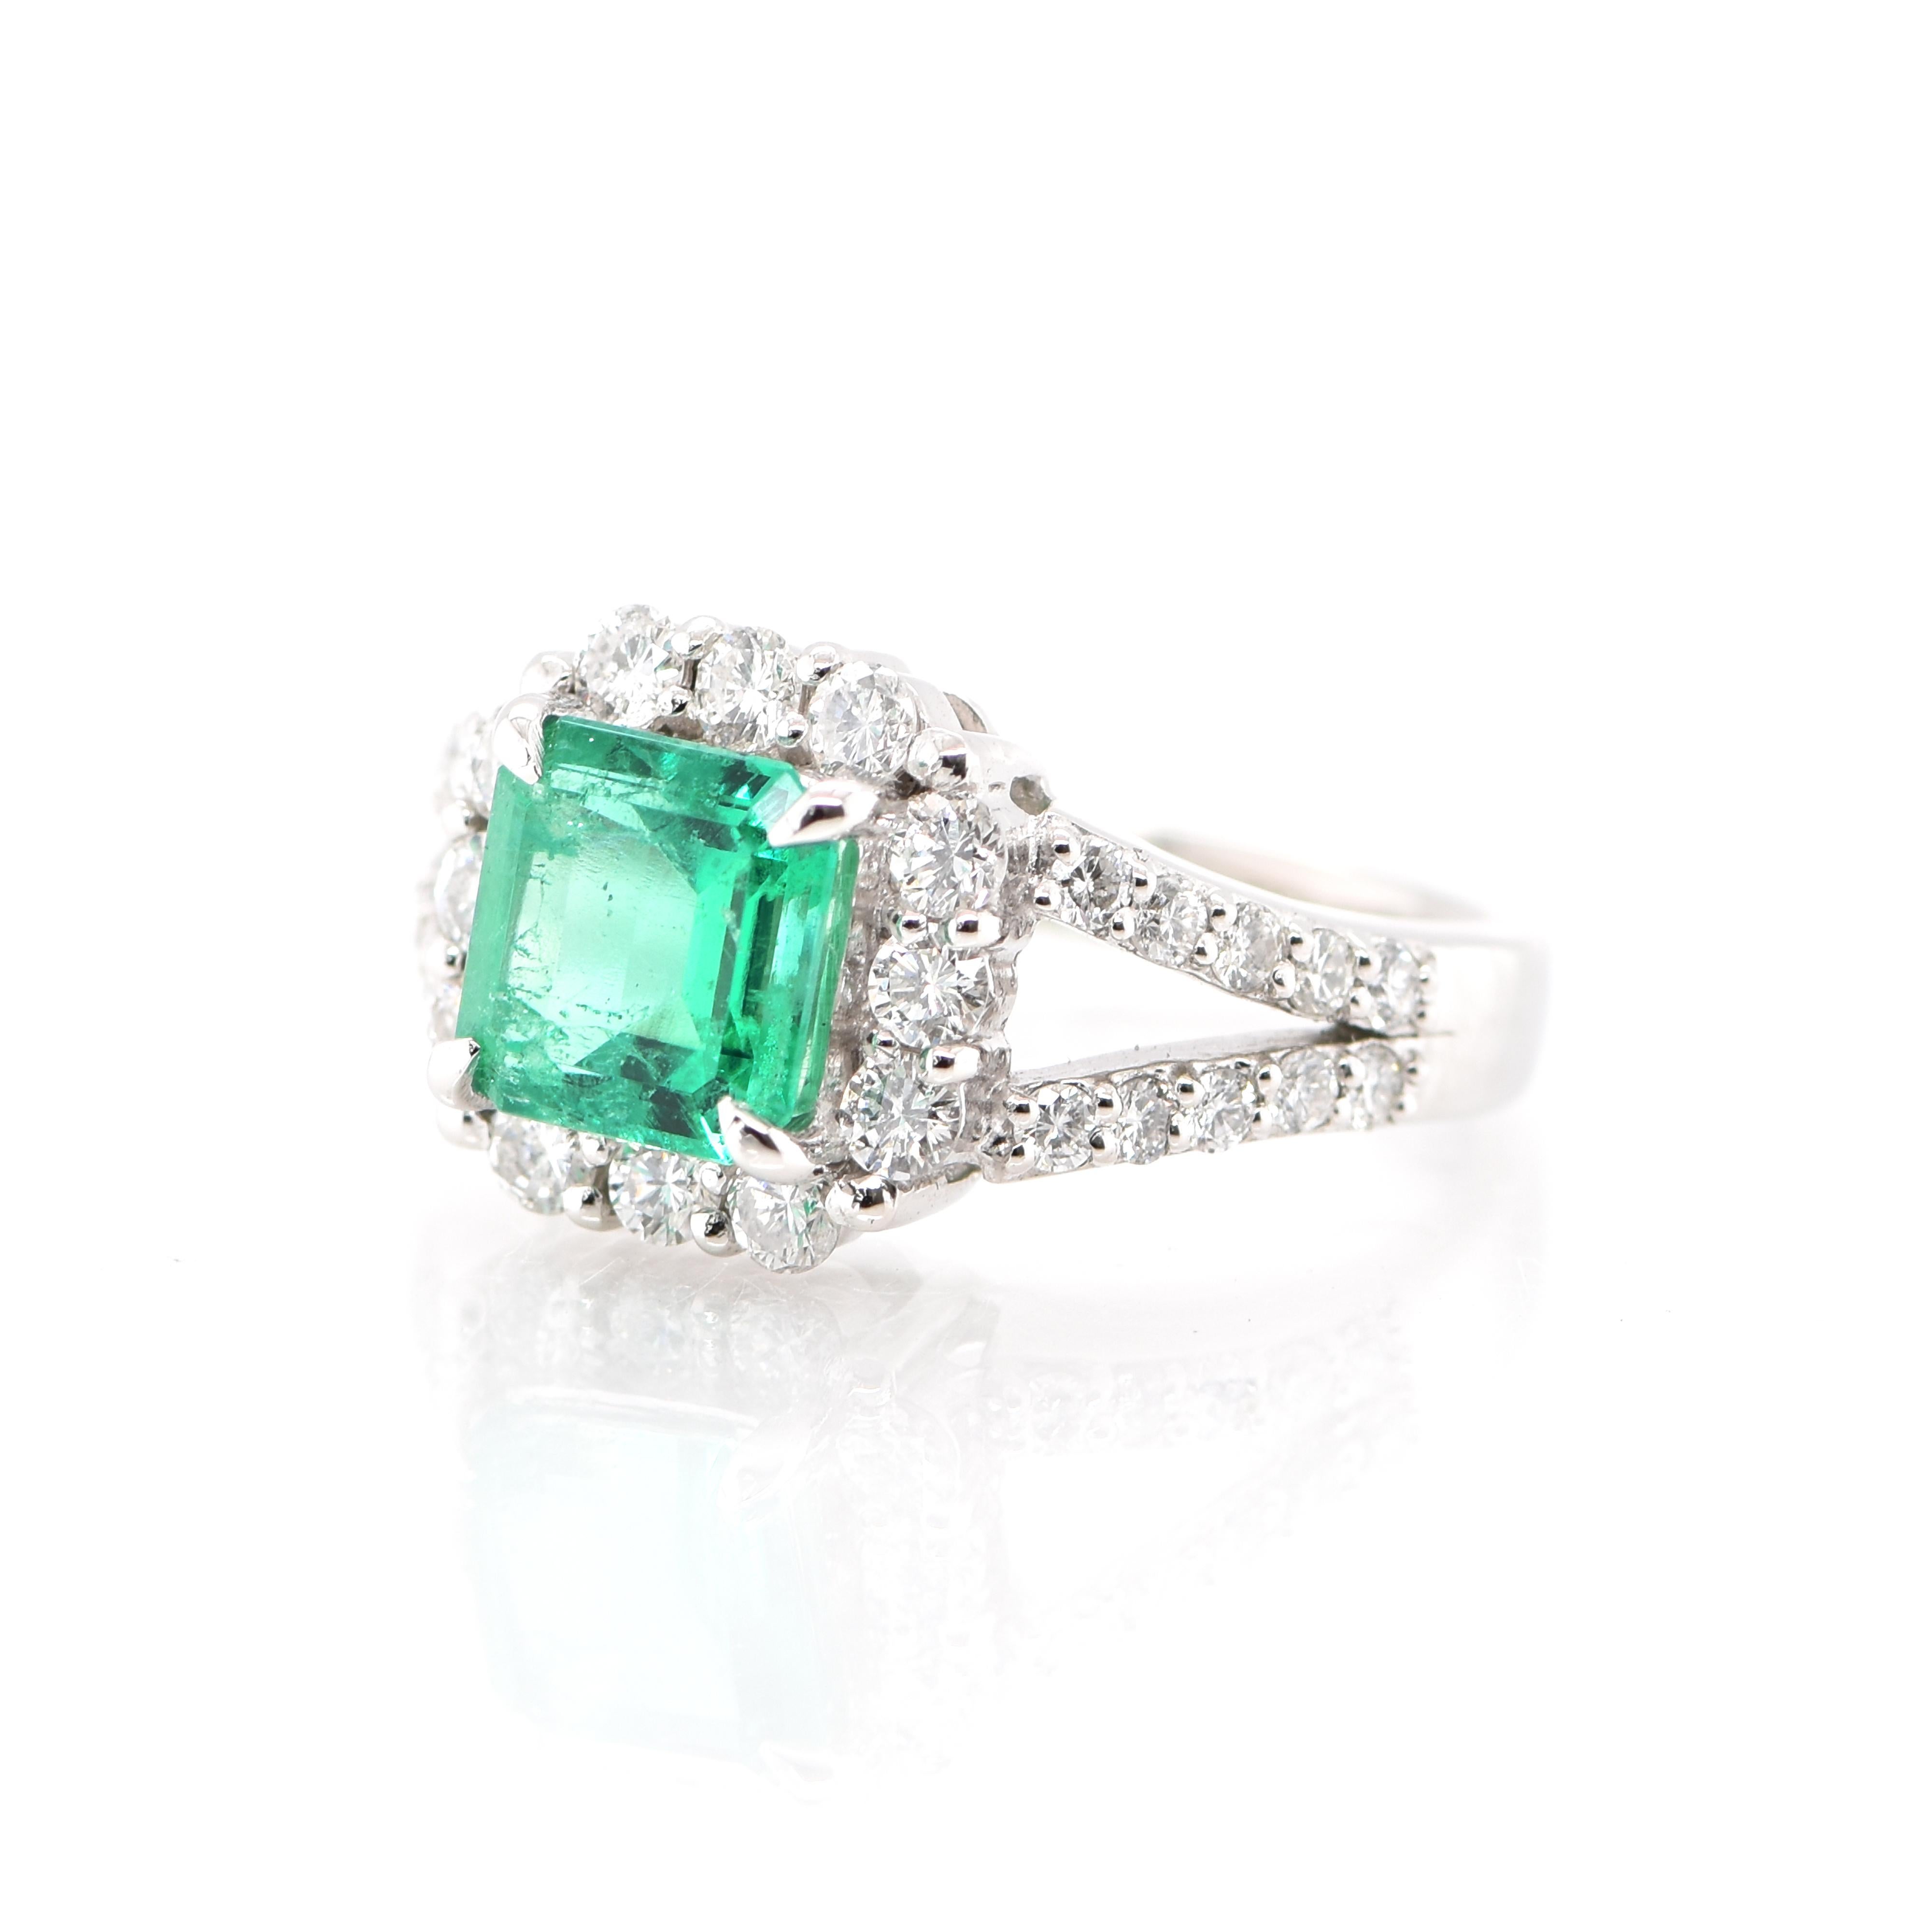 A stunning Engagement Ring featuring a 1.546 Carat Natural Emerald and 0.87 Carats of Diamond Accents set in Platinum. People have admired emerald’s green for thousands of years. Emeralds have always been associated with the lushest landscapes and